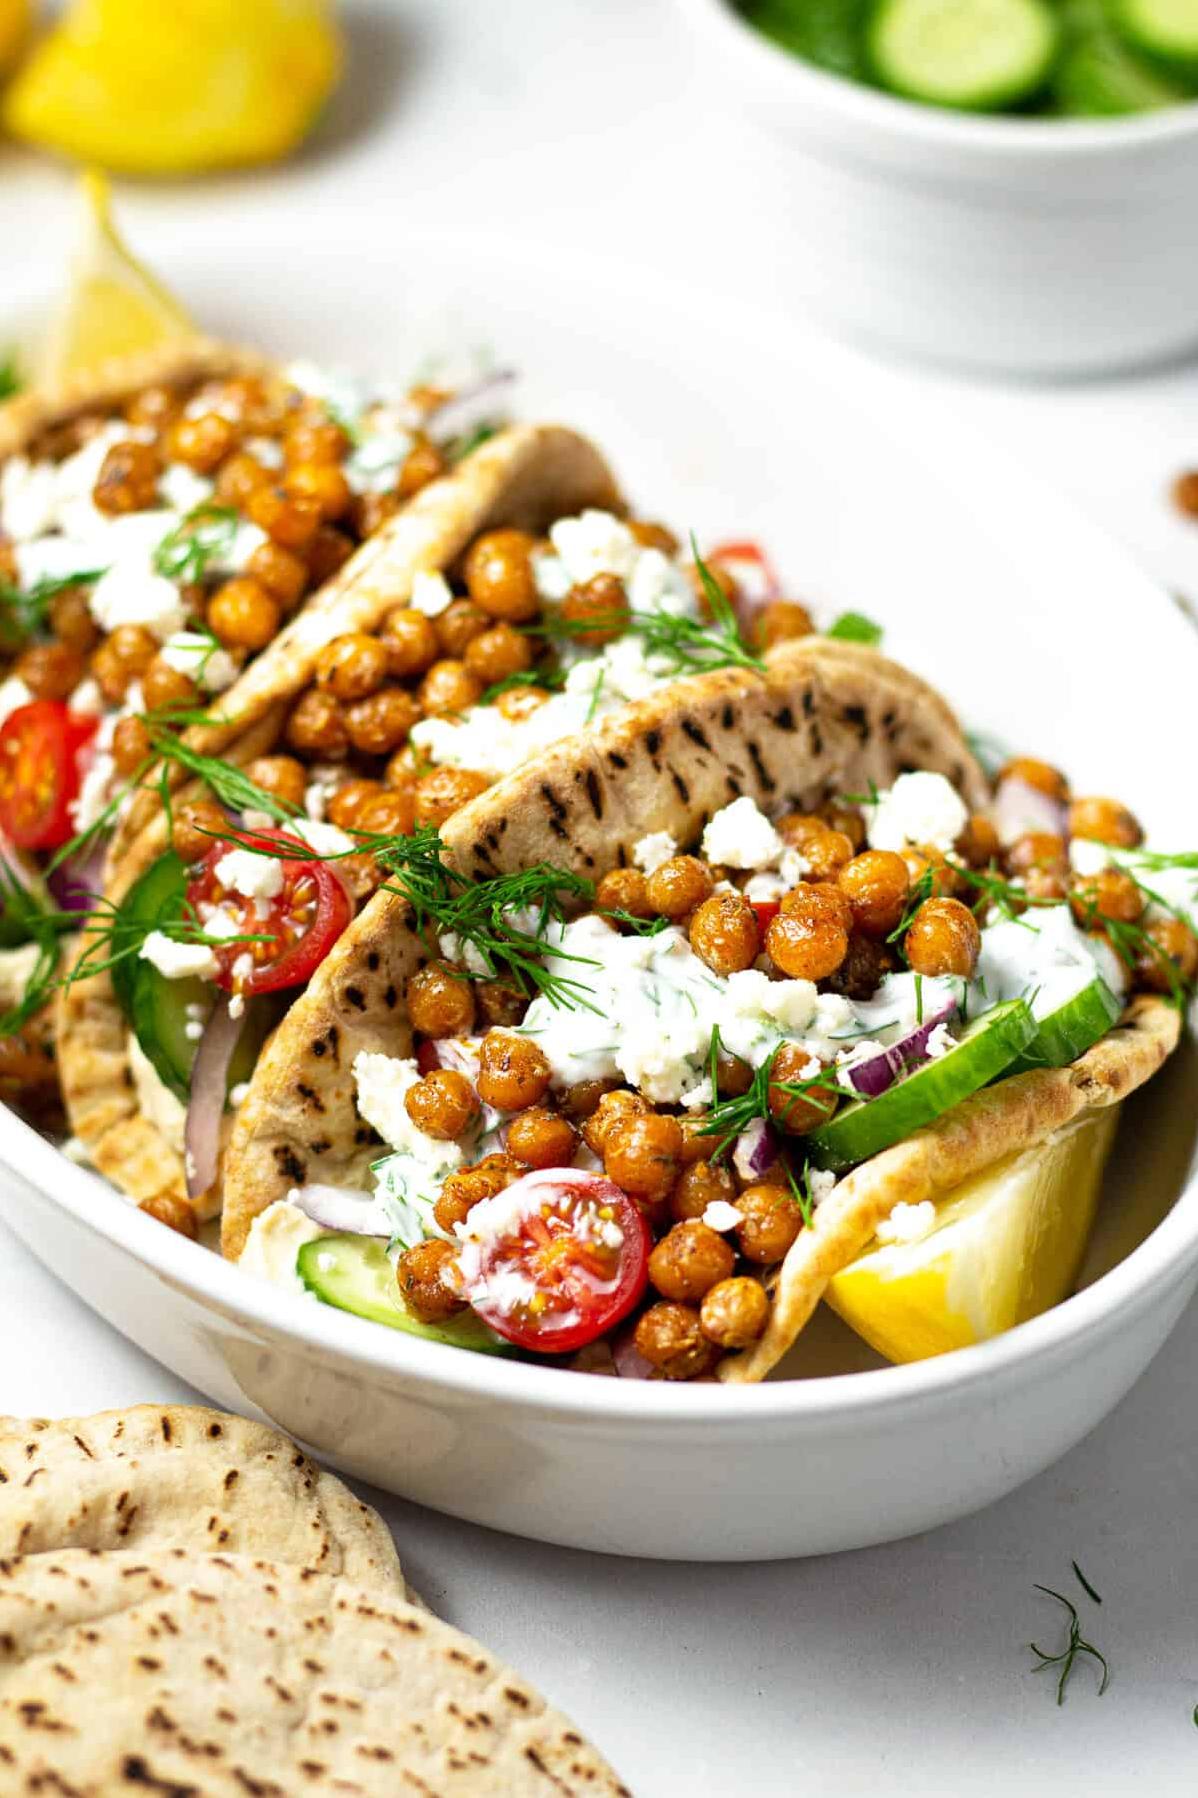  Turn up the flavor with these zesty chickpea gyros.